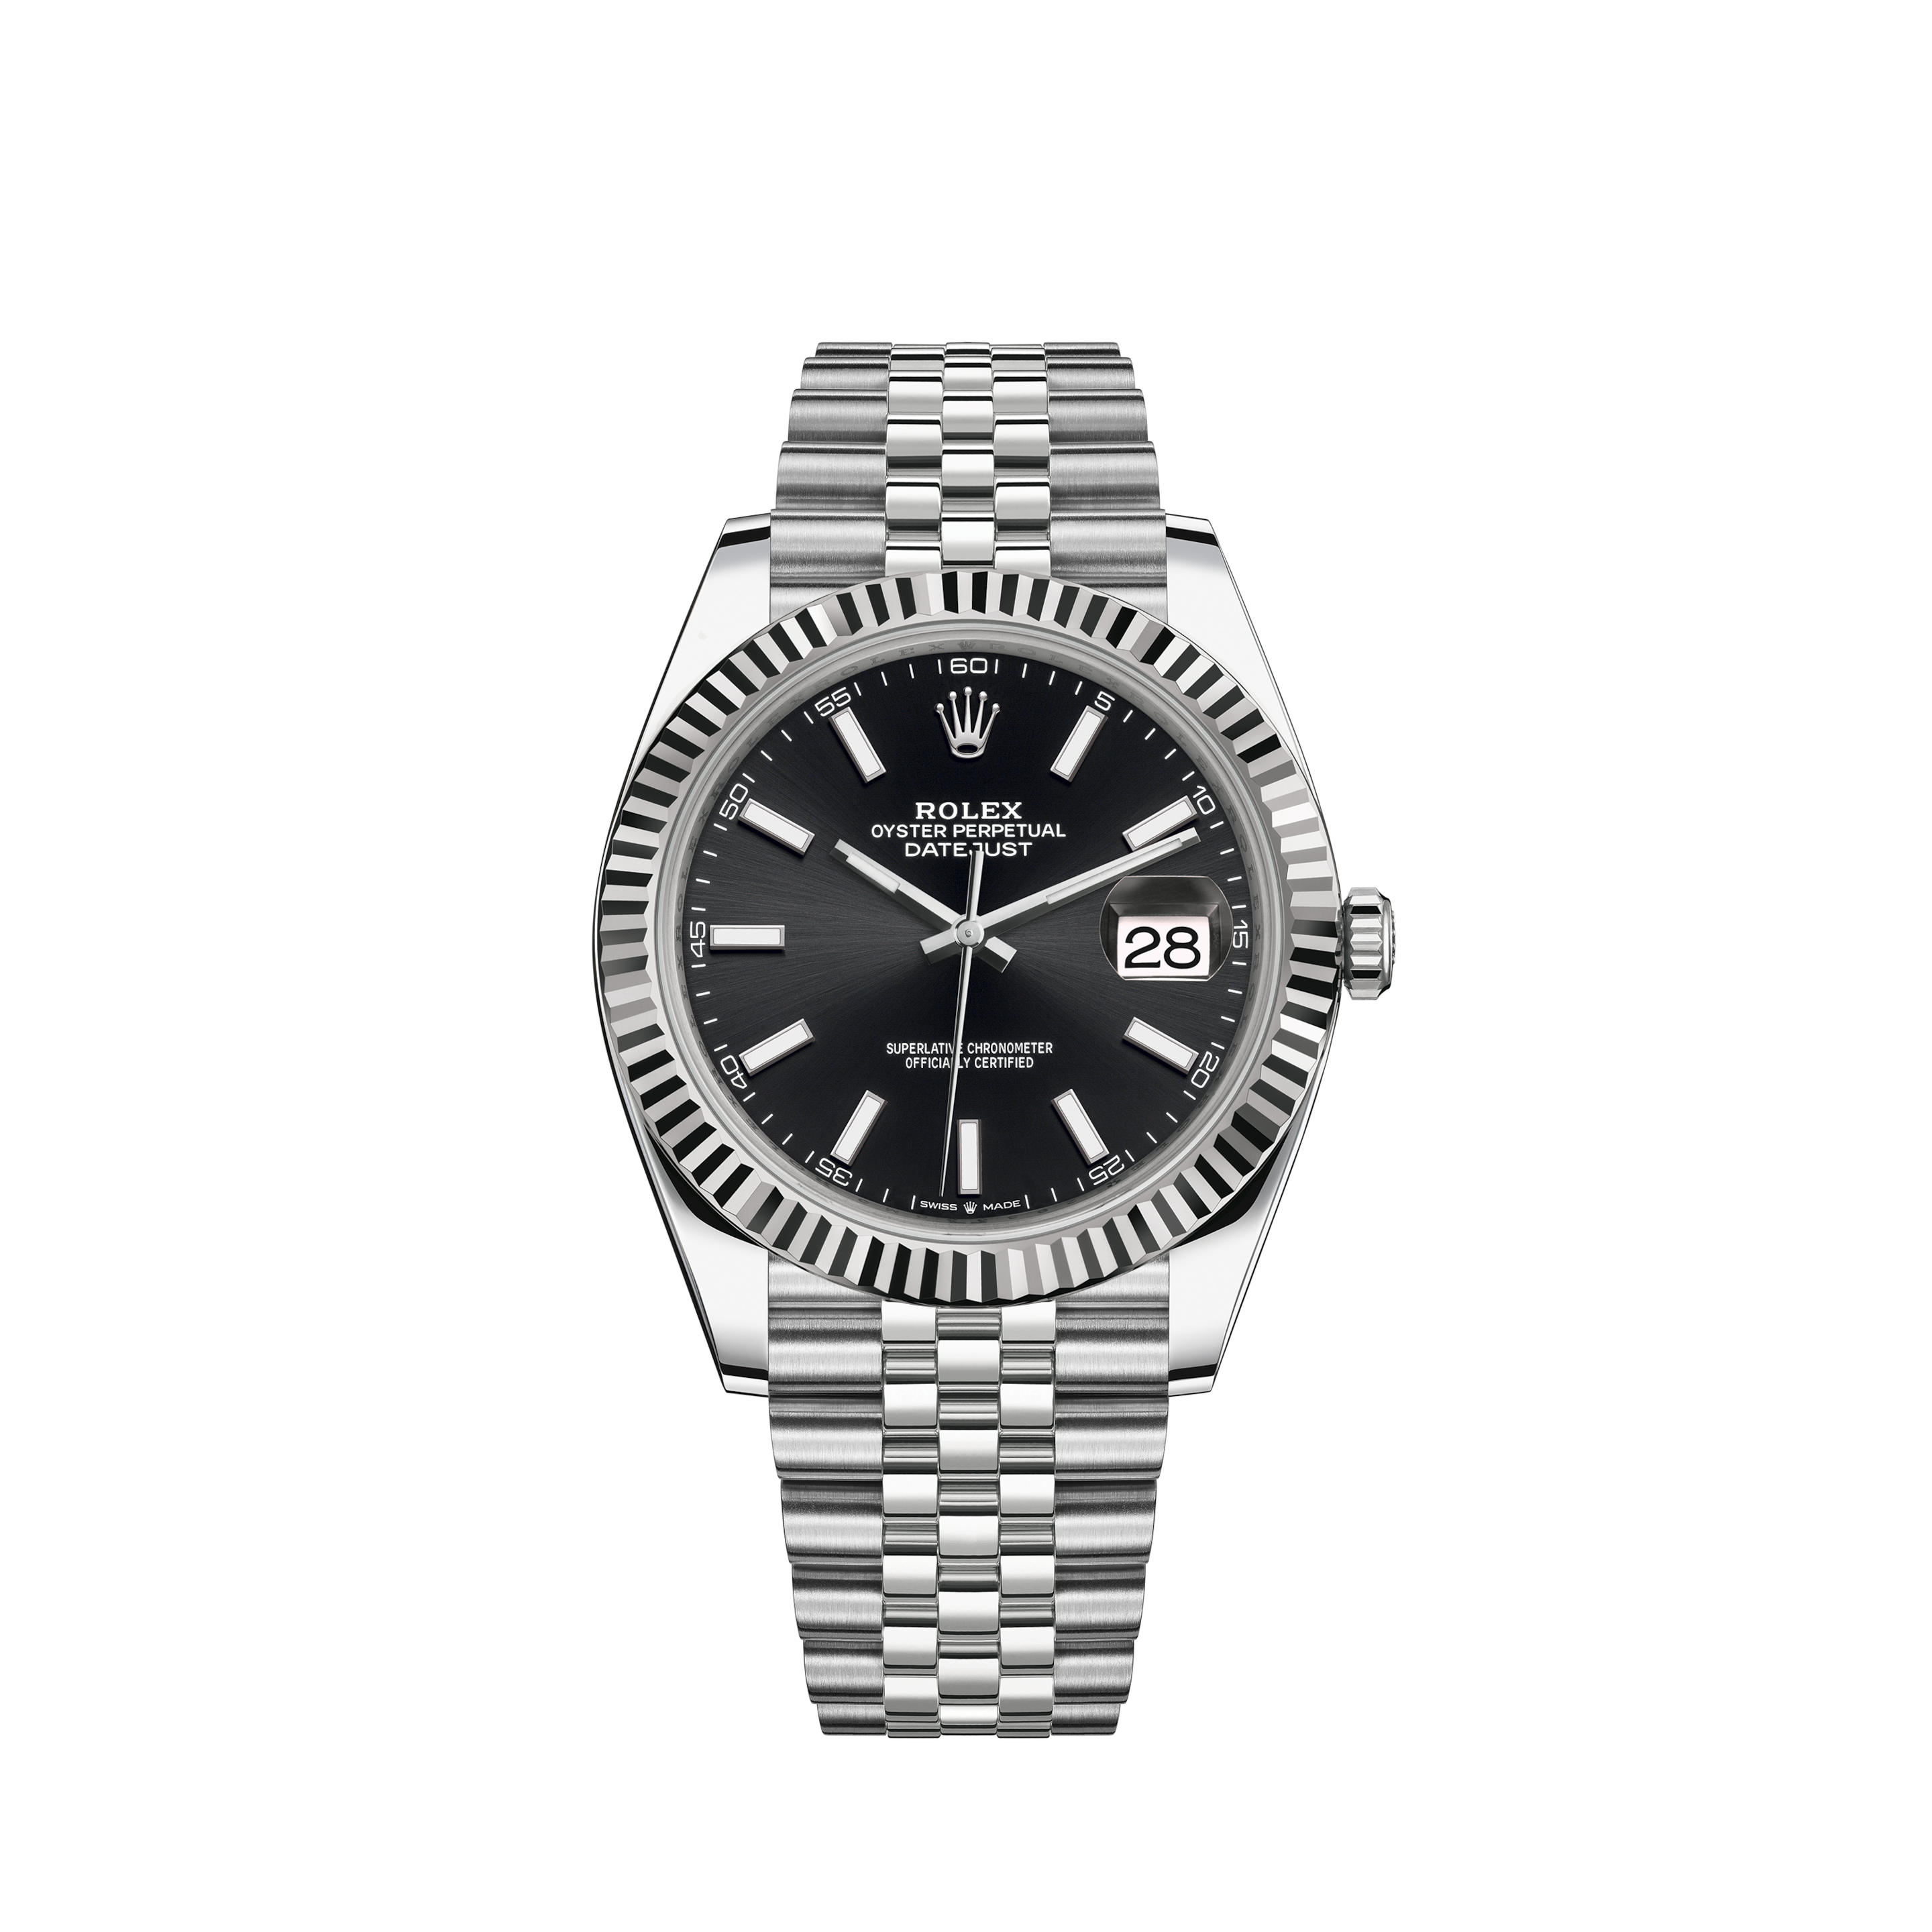 rolex oyster perpetual datejust 41 price